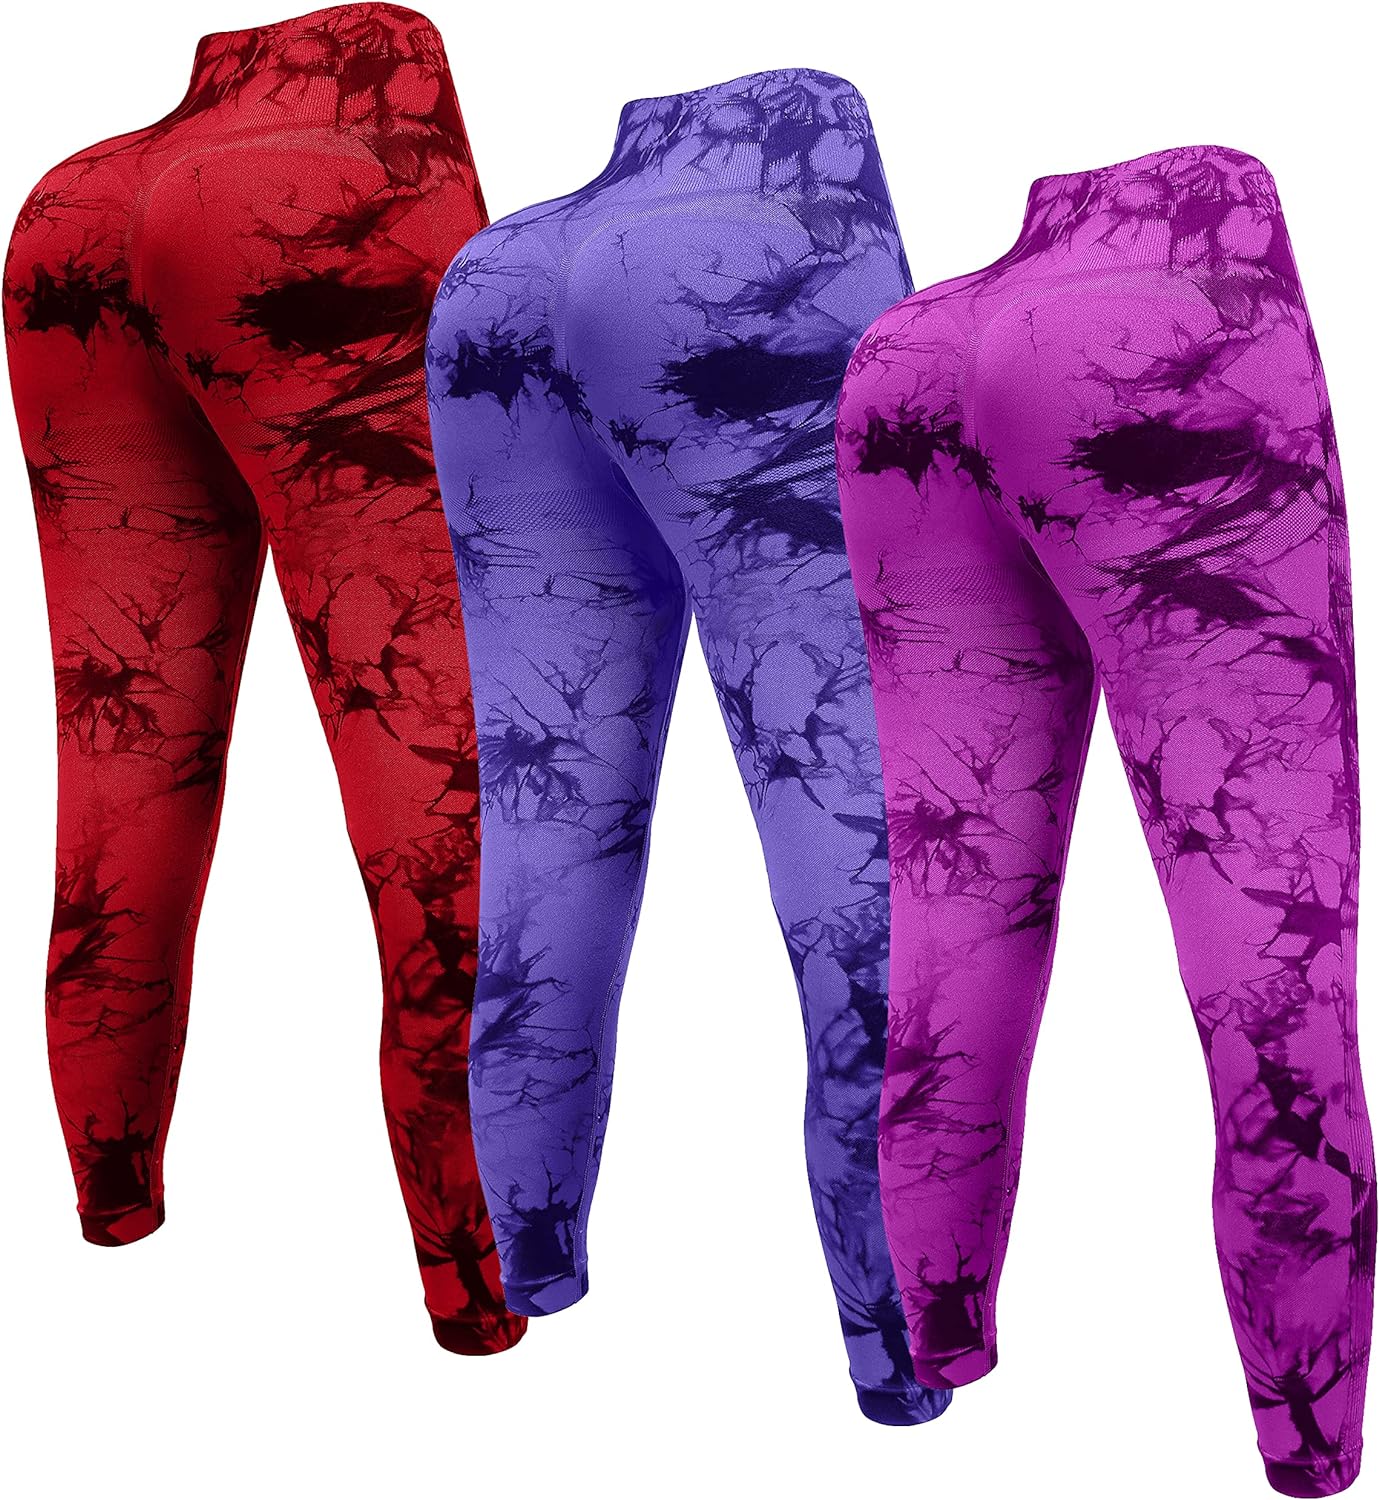 OVESPORT 3 Pack Tie Dye Seamless High Waisted Workout Leggings for Women Scrunch Butt Lifting Yoga Gym Athletic Pants